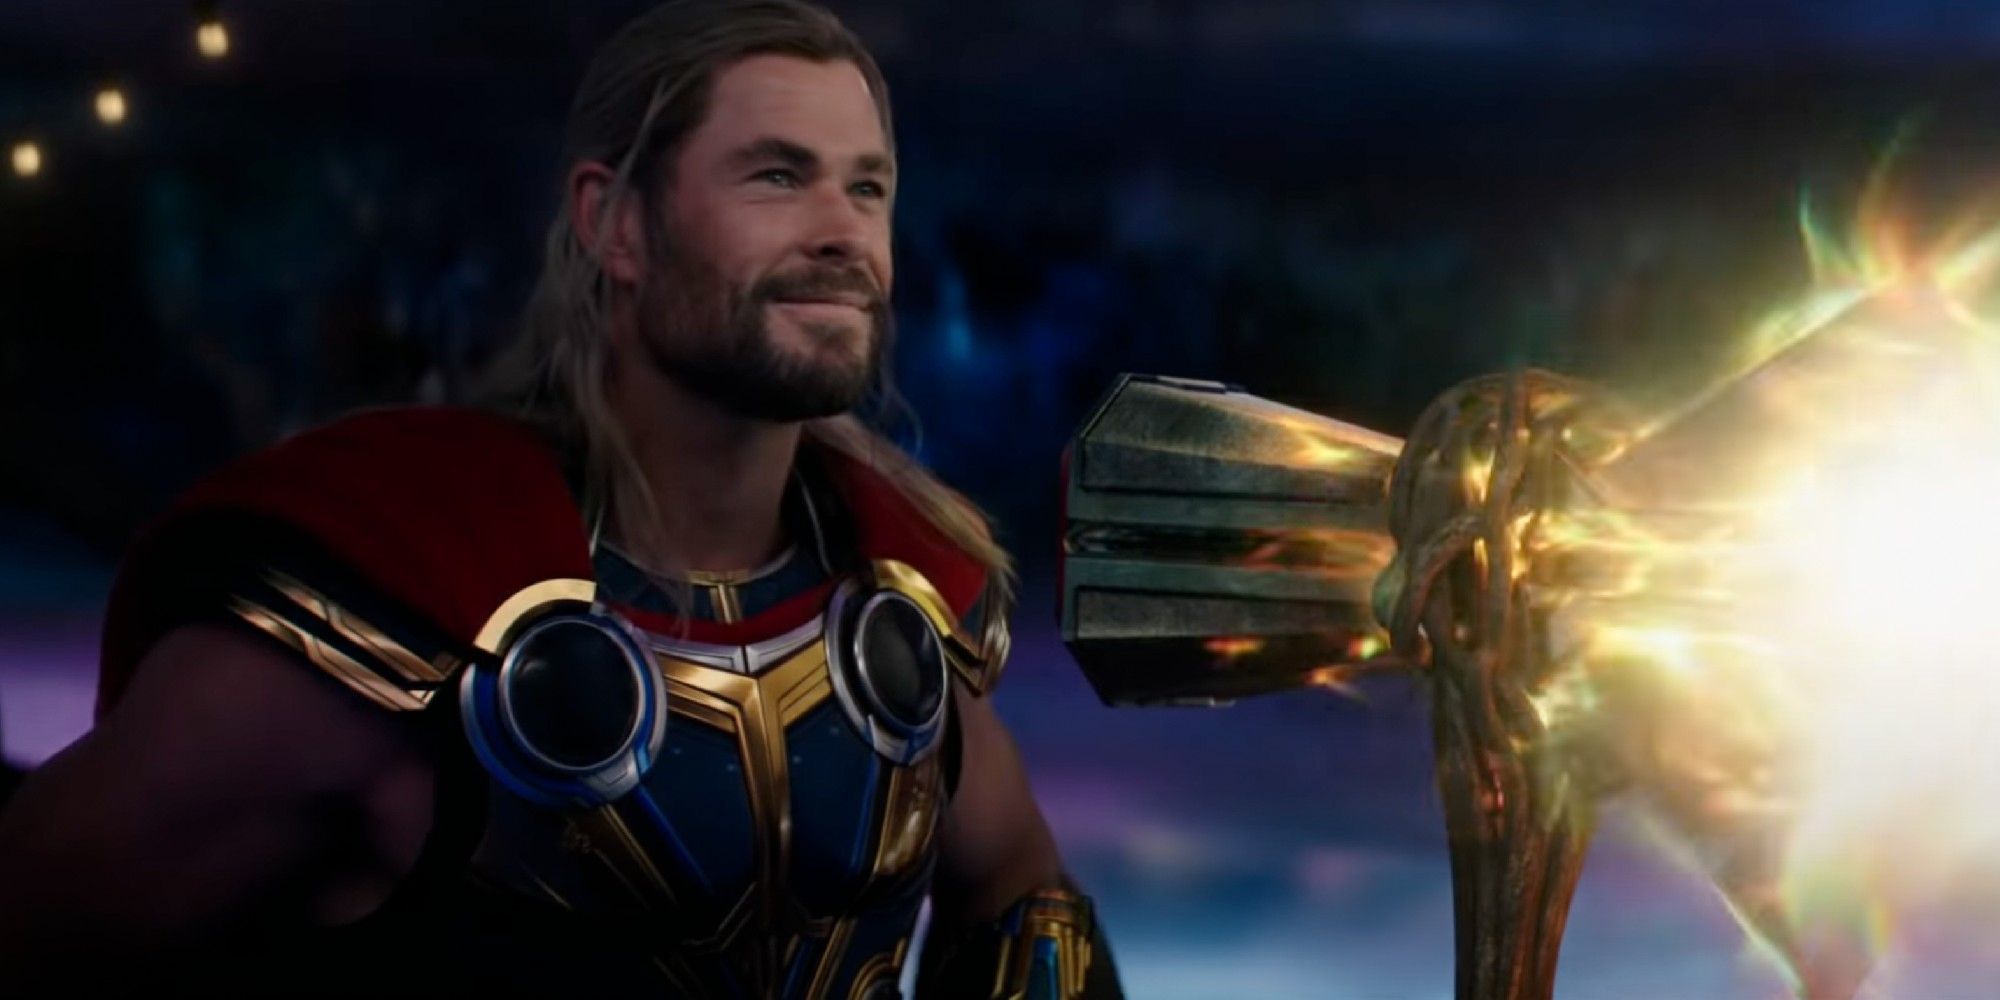 Chris Hemsworth as Thor in Love and Thunder Trailer